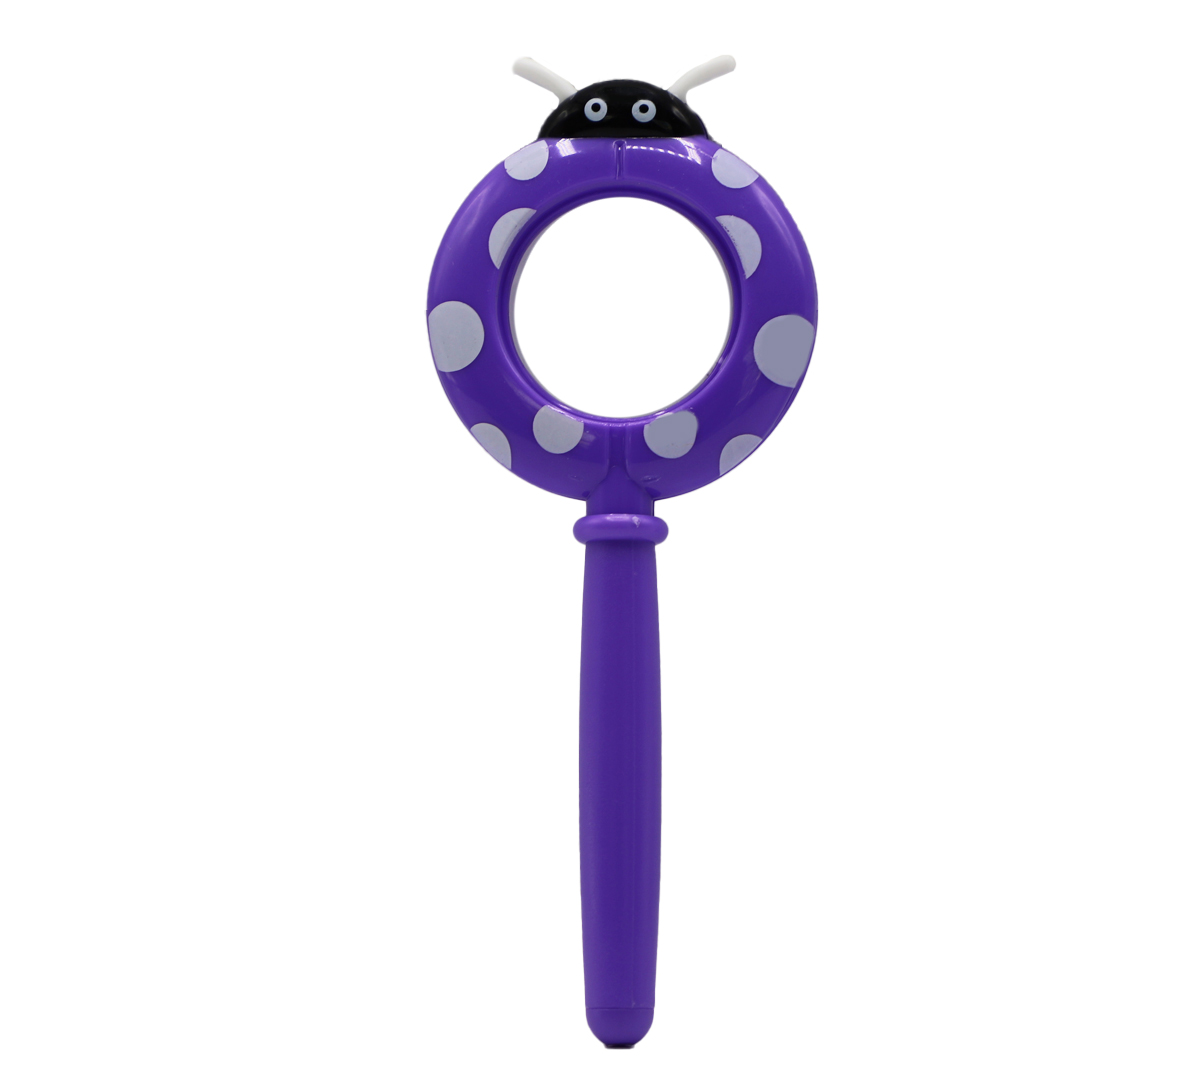 Ladybug magnifying glasses from YIPPEE